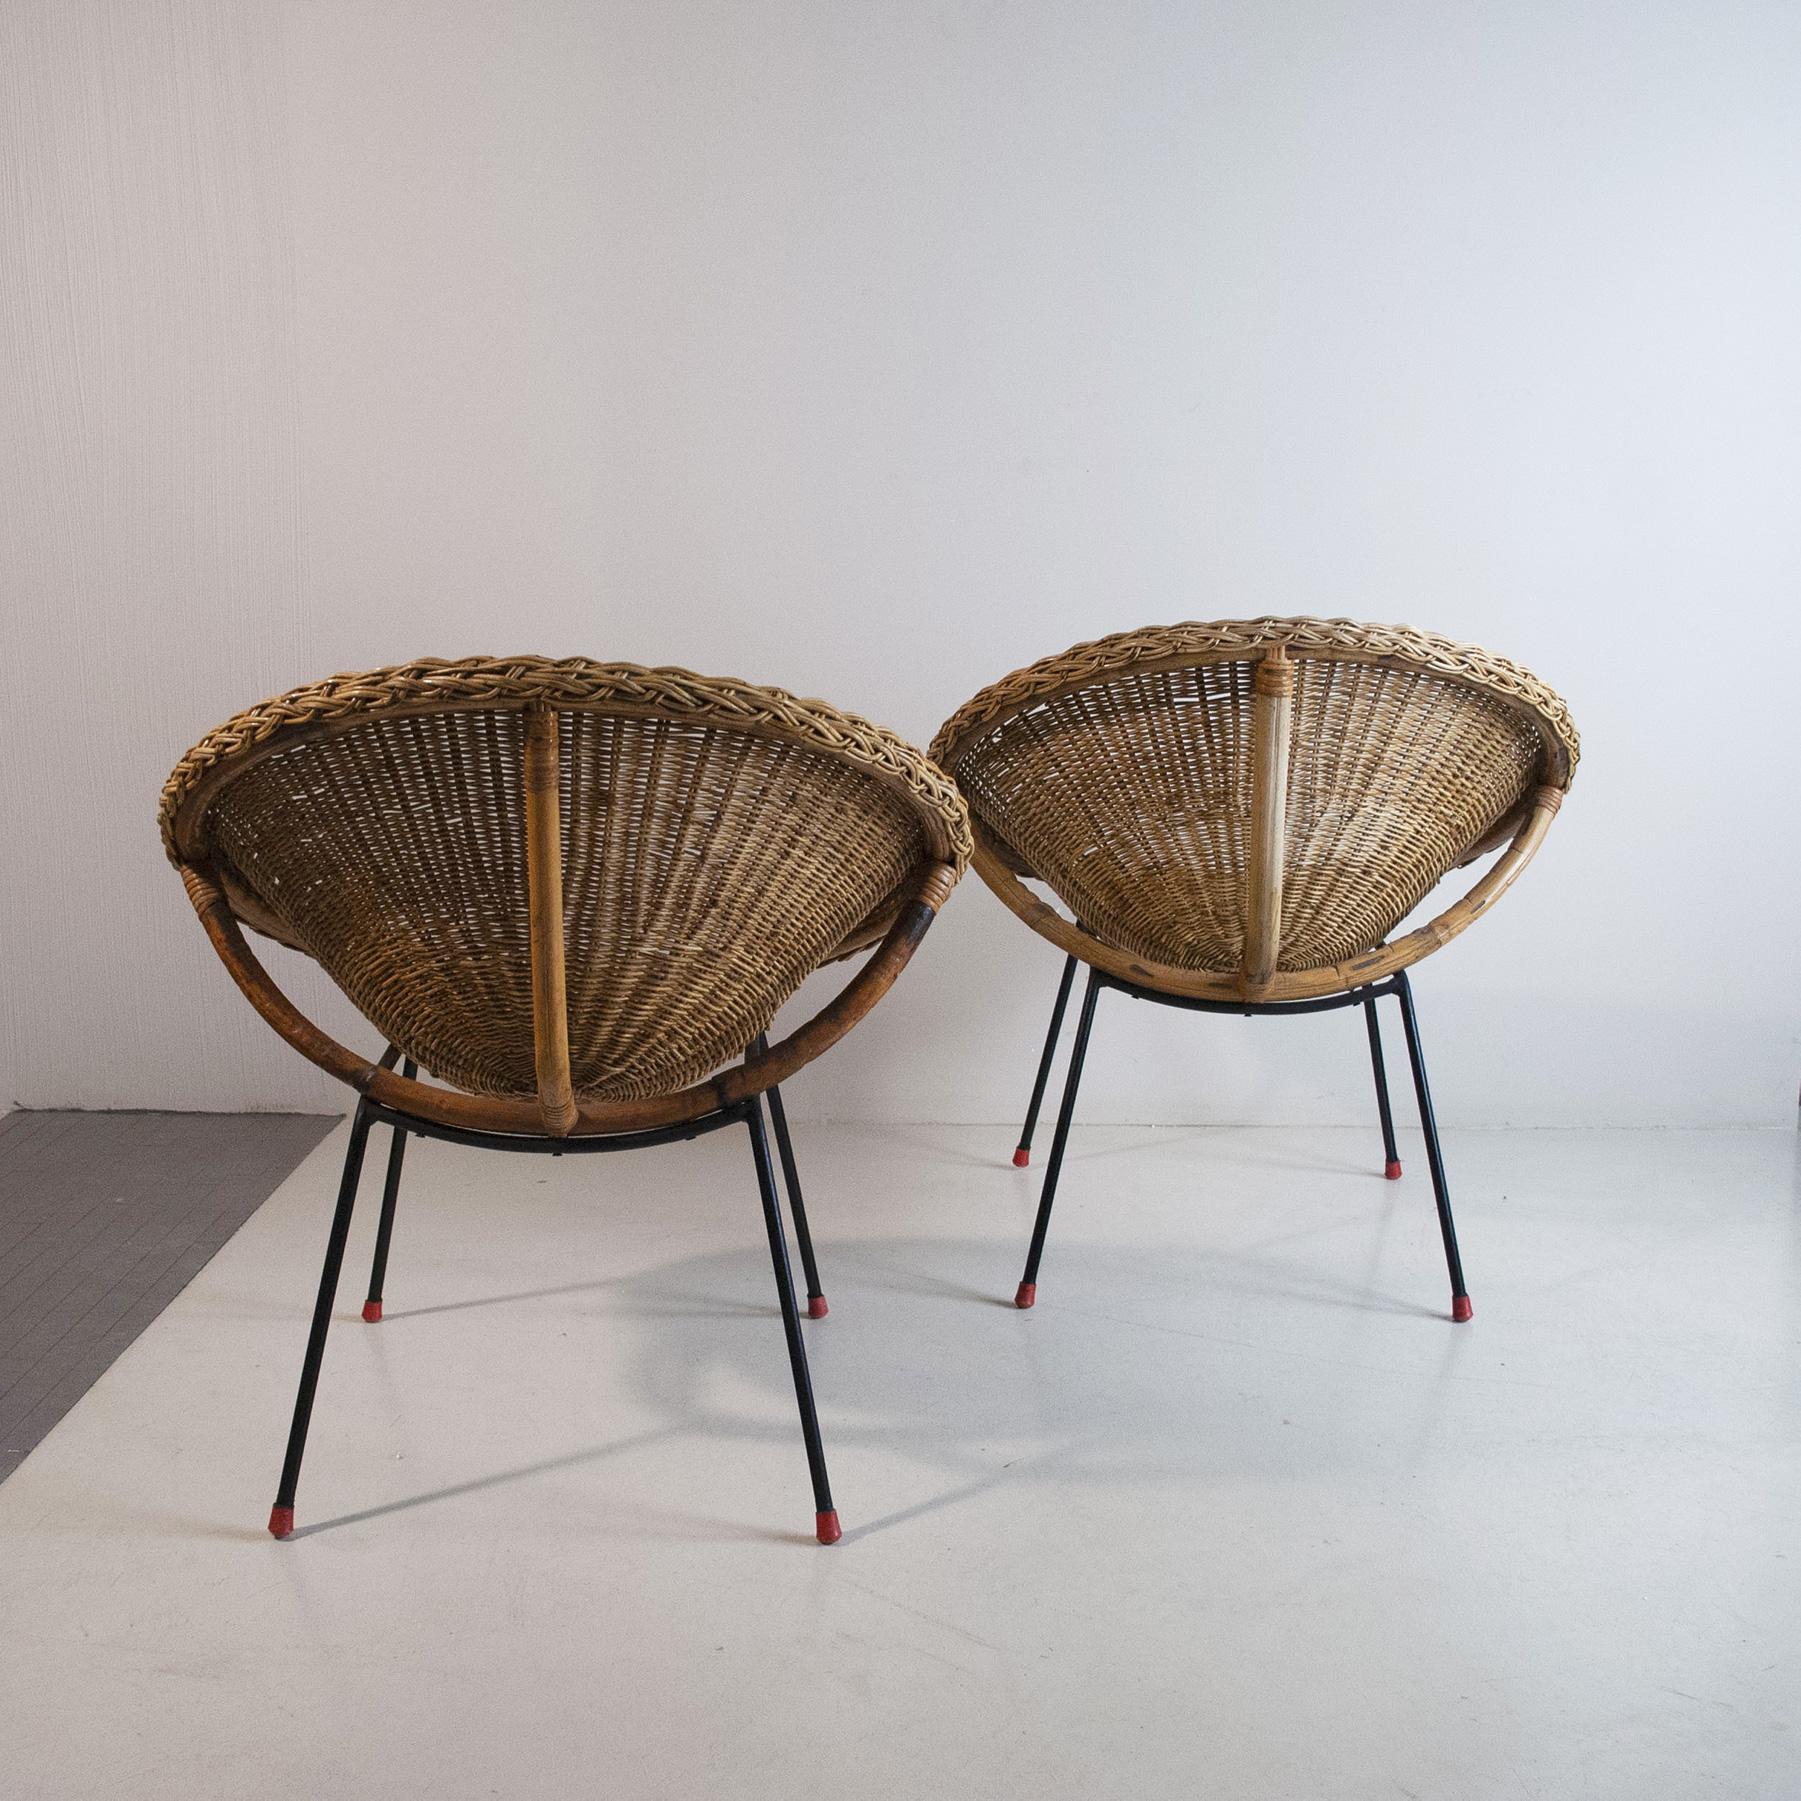 Italian Midcentury 1960s Eggs Cane Chairs In Good Condition For Sale In bari, IT